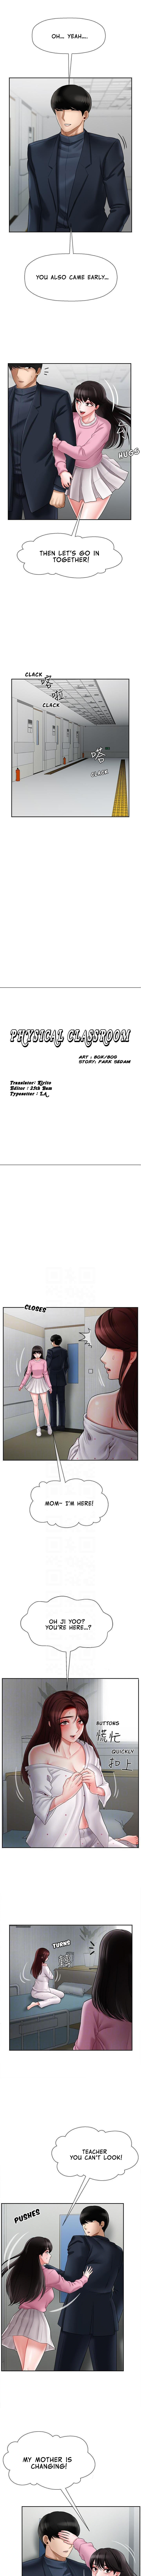 Physical Classroom - Chapter 16 Page 1